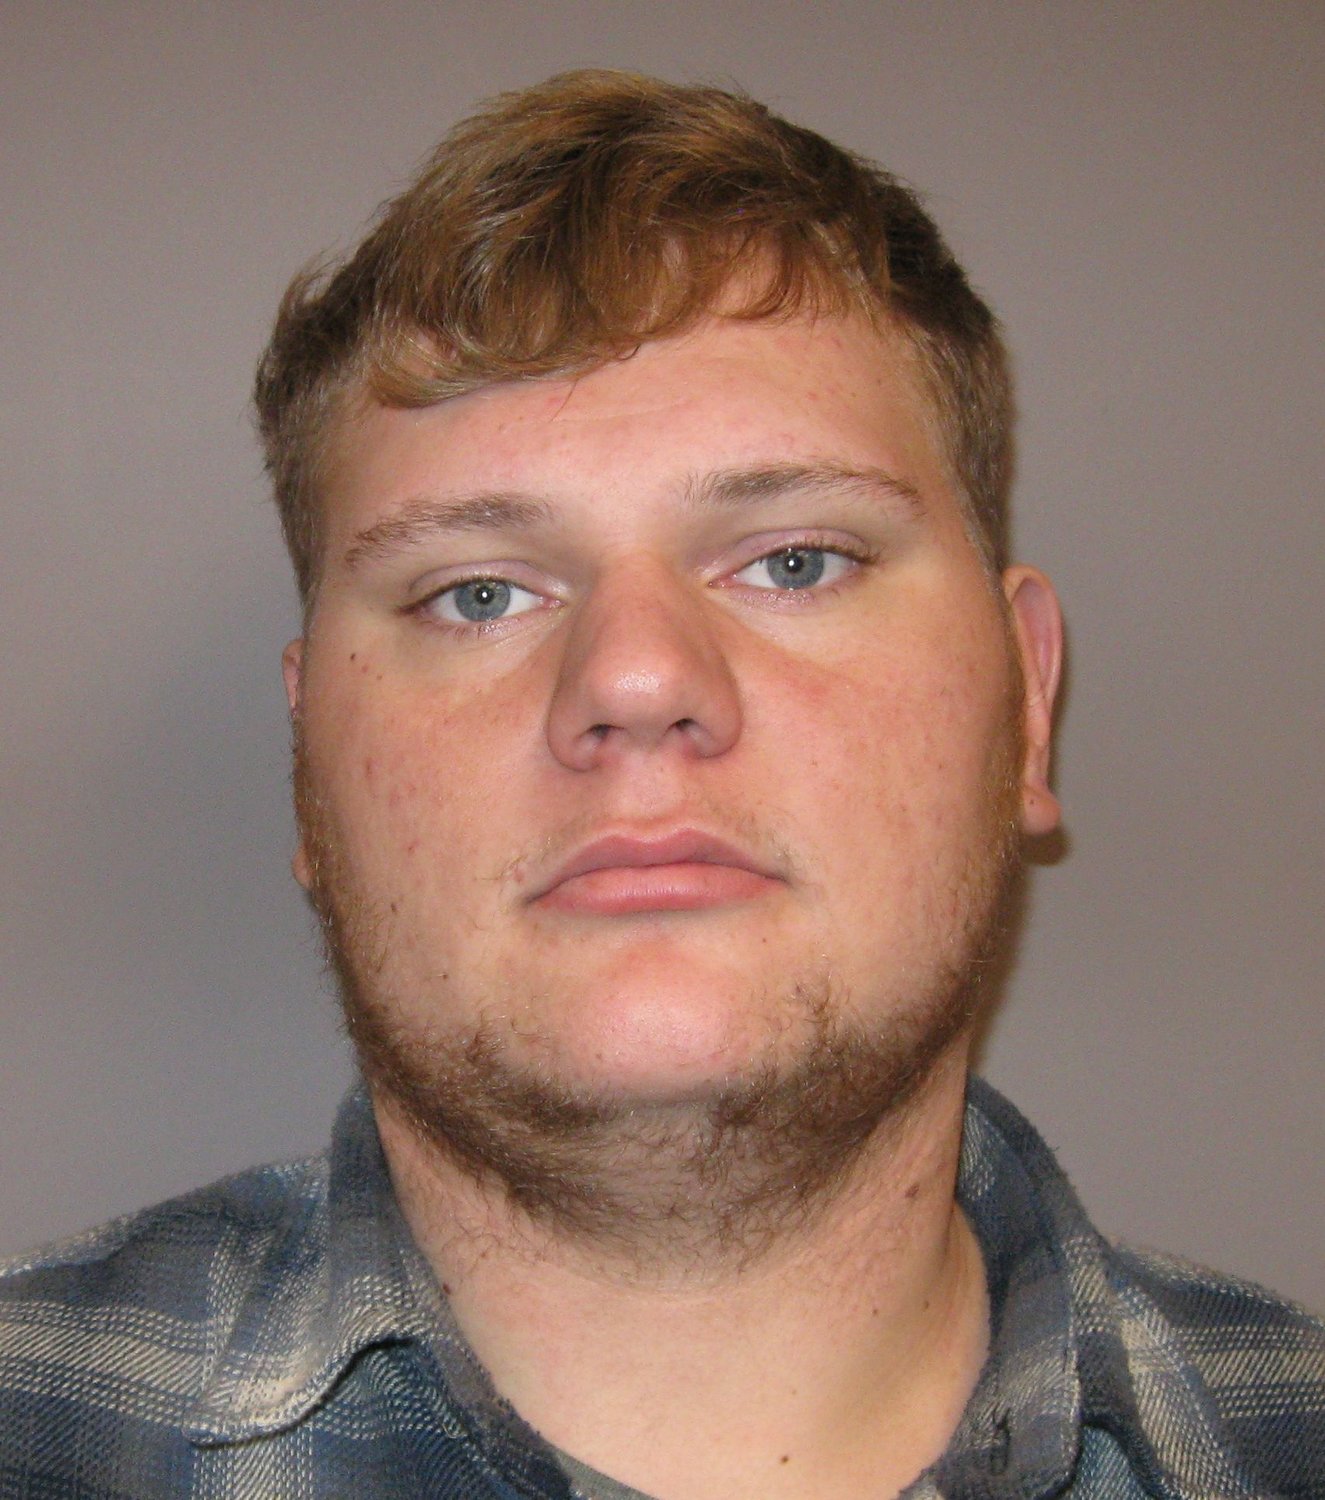 Level 1 sex offender Aaron J. Eidet, 20, is required to register as a sex offender due to a 2015 conviction in Saline County, Kansas, on one count of aggravated indecent liberties with a child. 